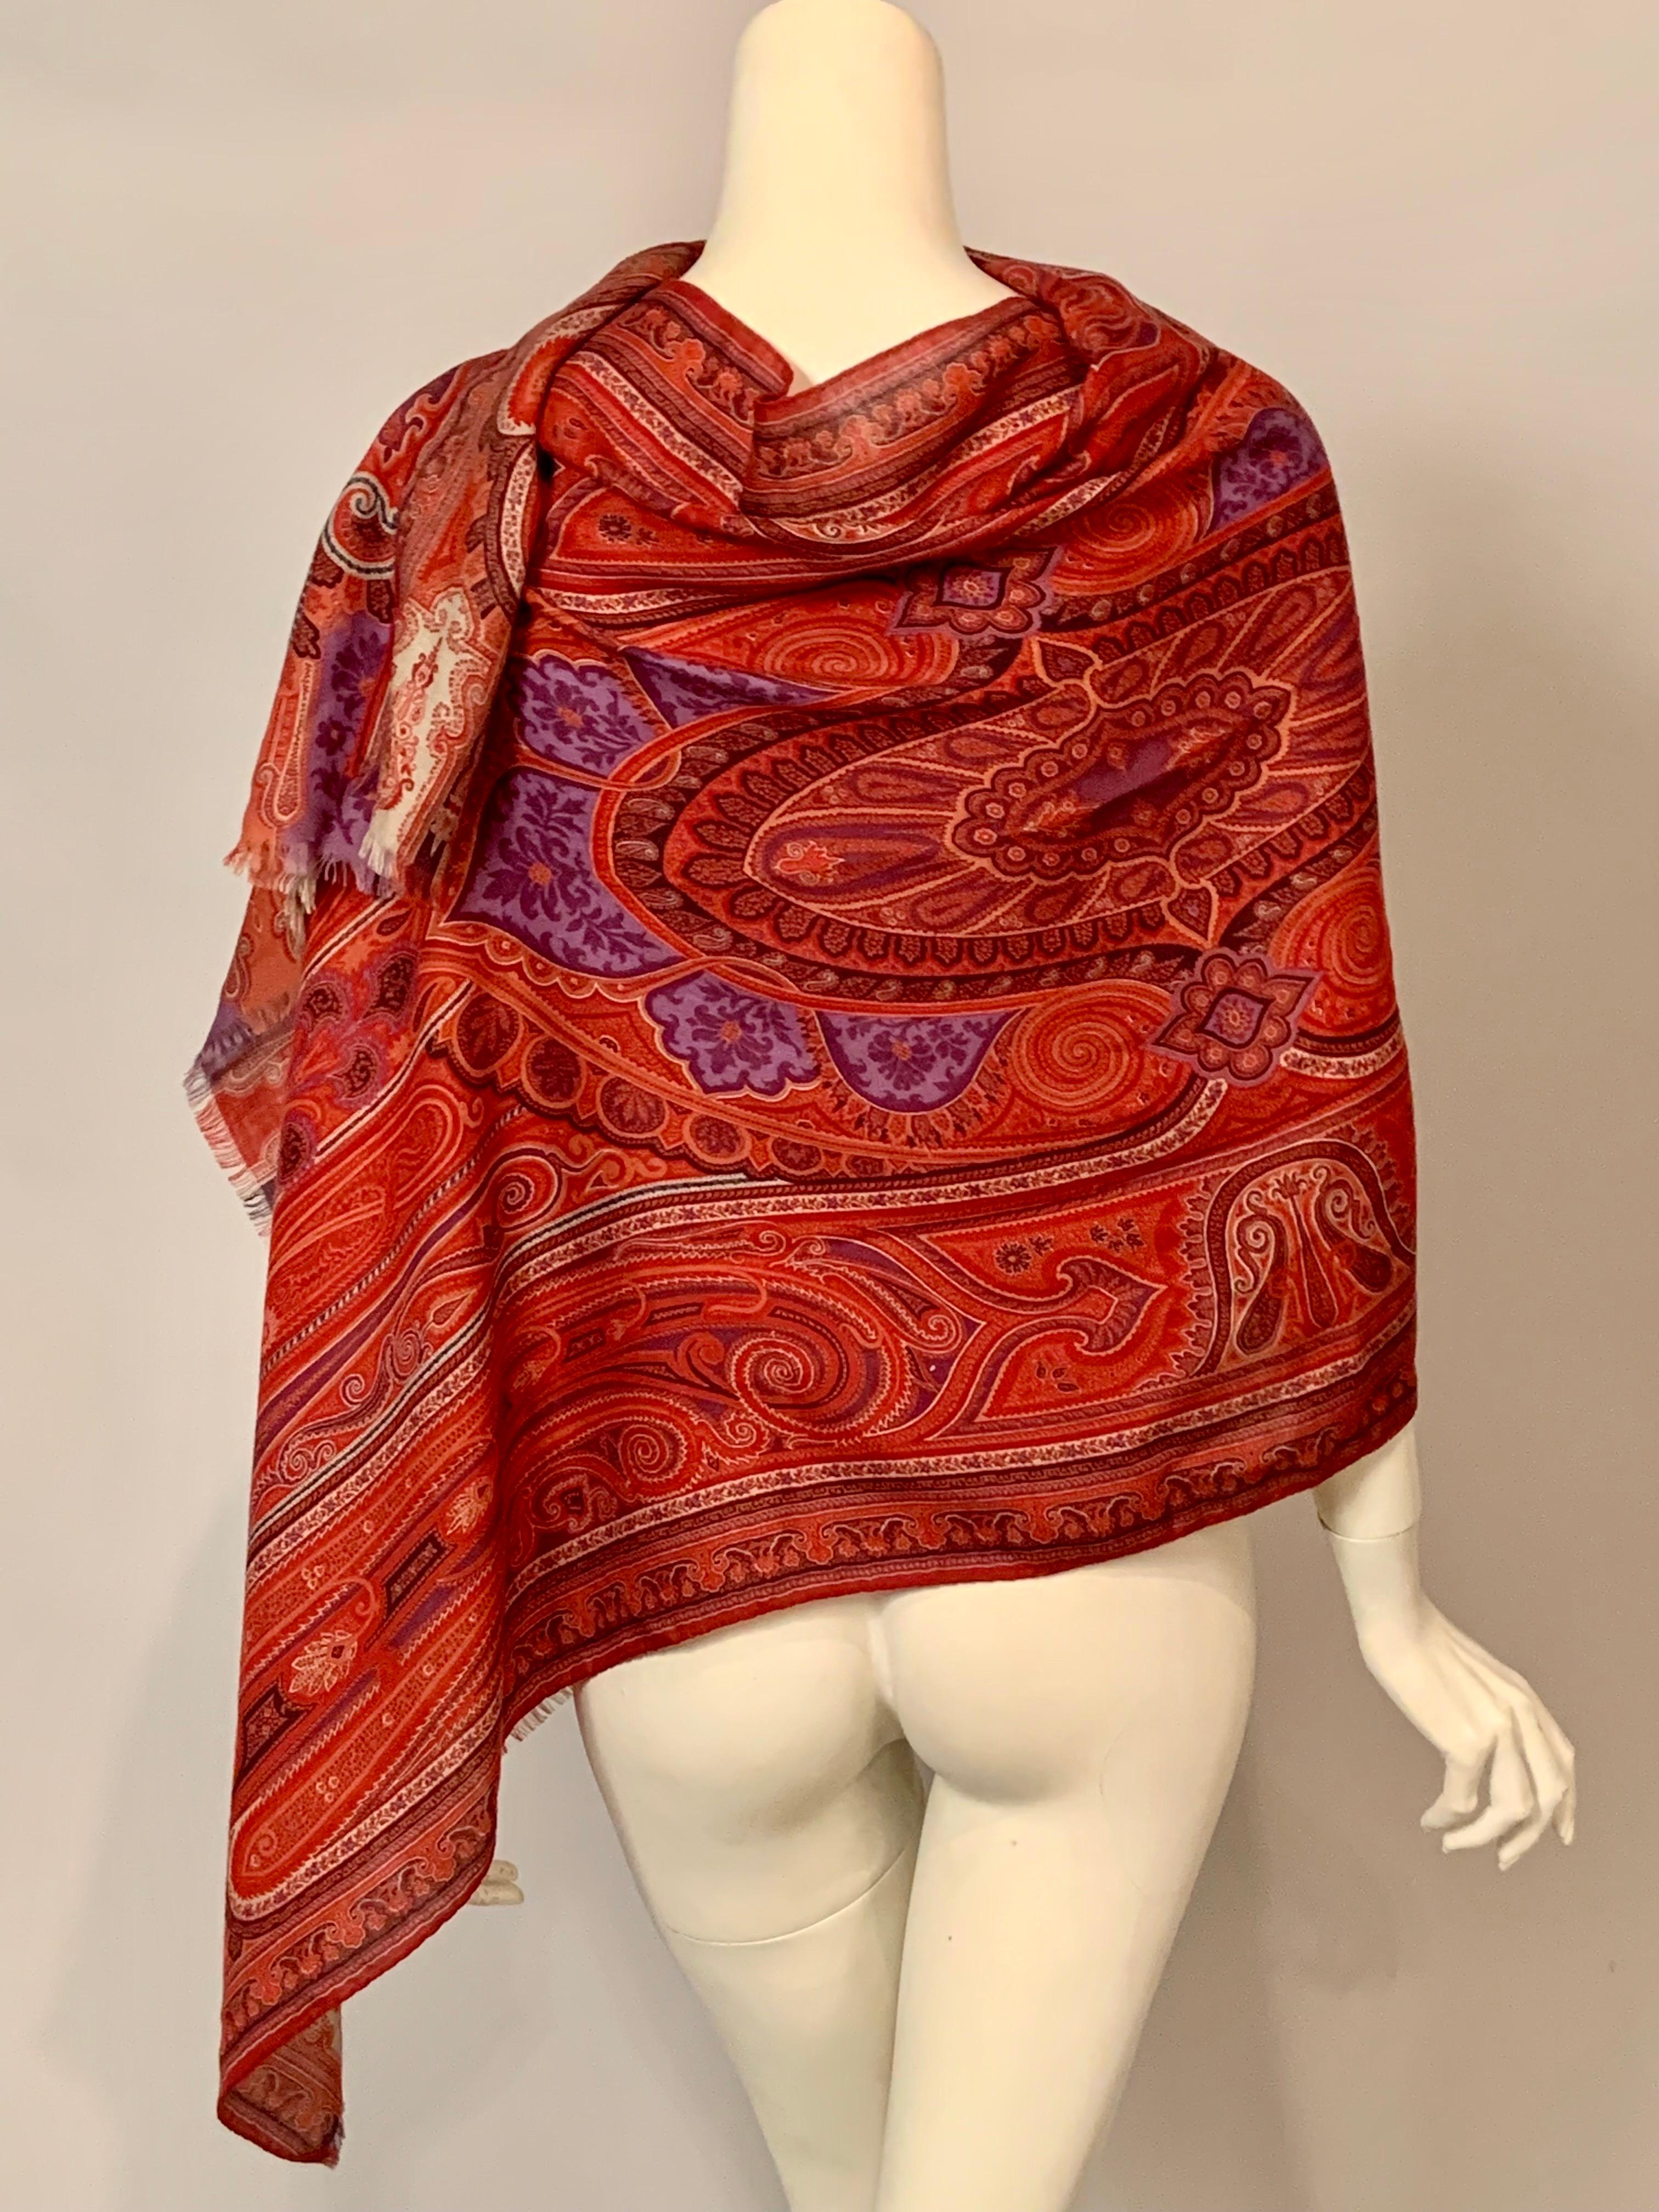 Etro Classic Red Wool and Silk Paisley Scarf with Lavender Center 2